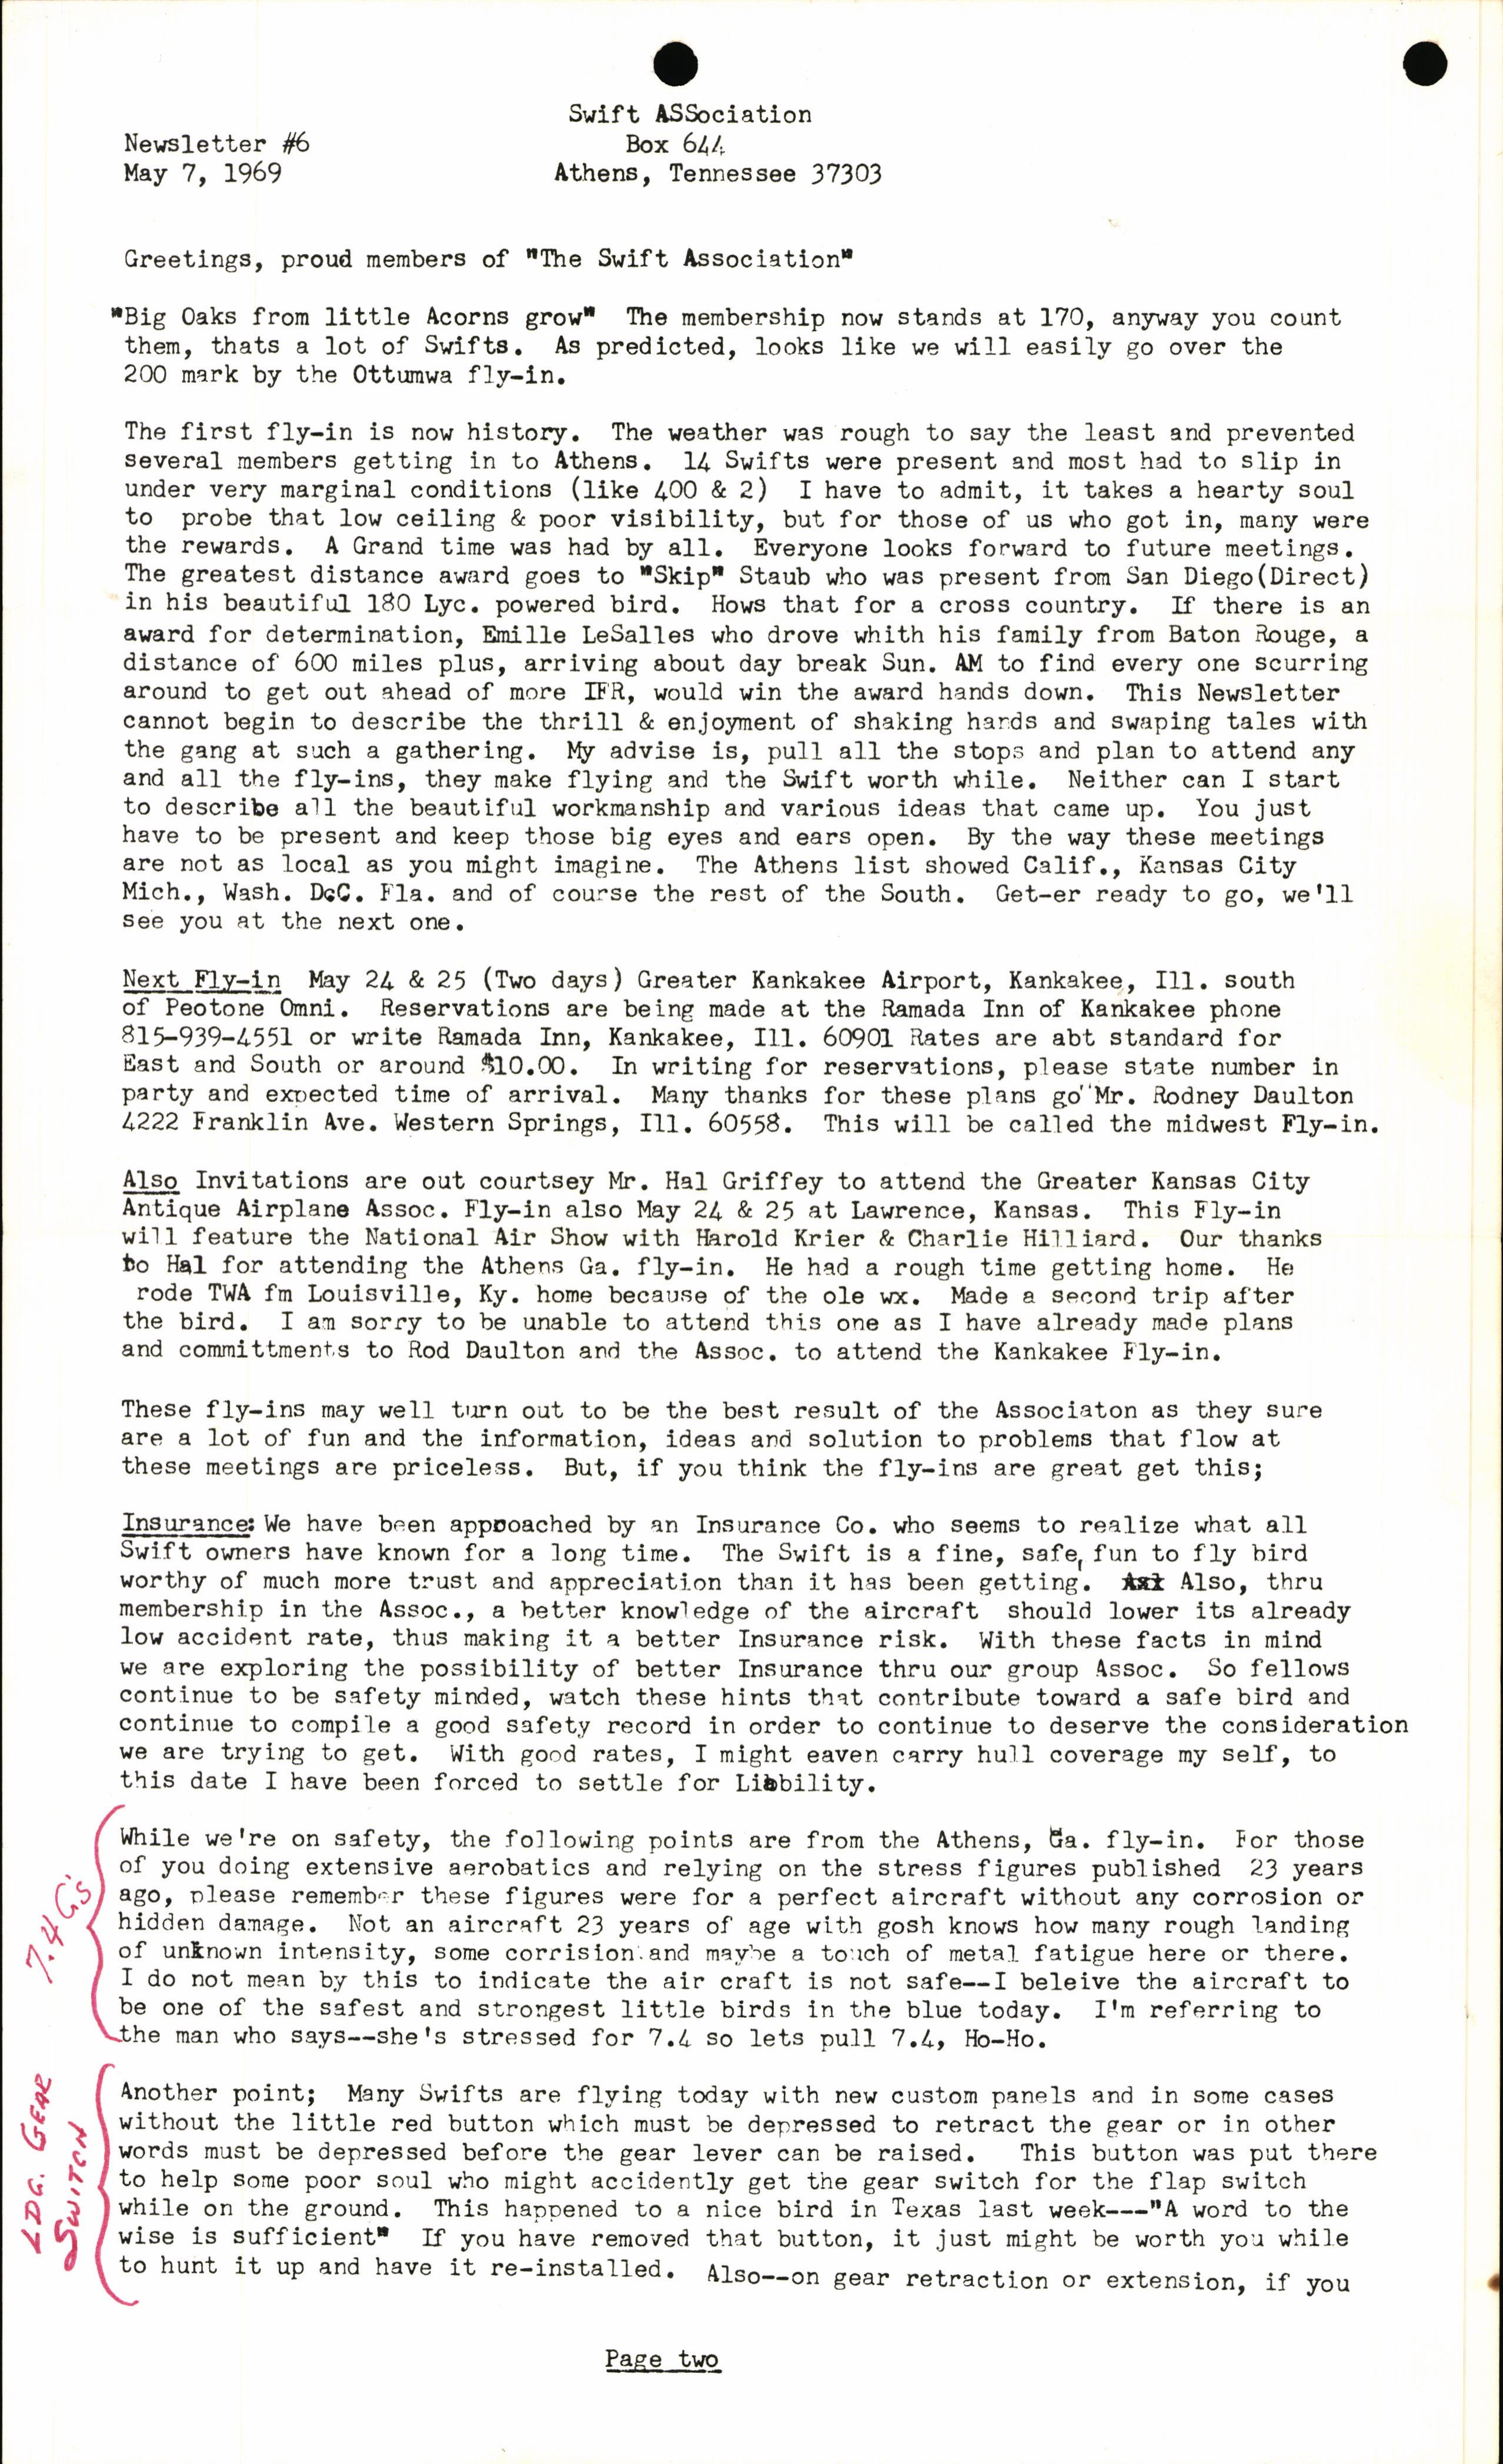 Sample page 1 from AirCorps Library document: May 1969